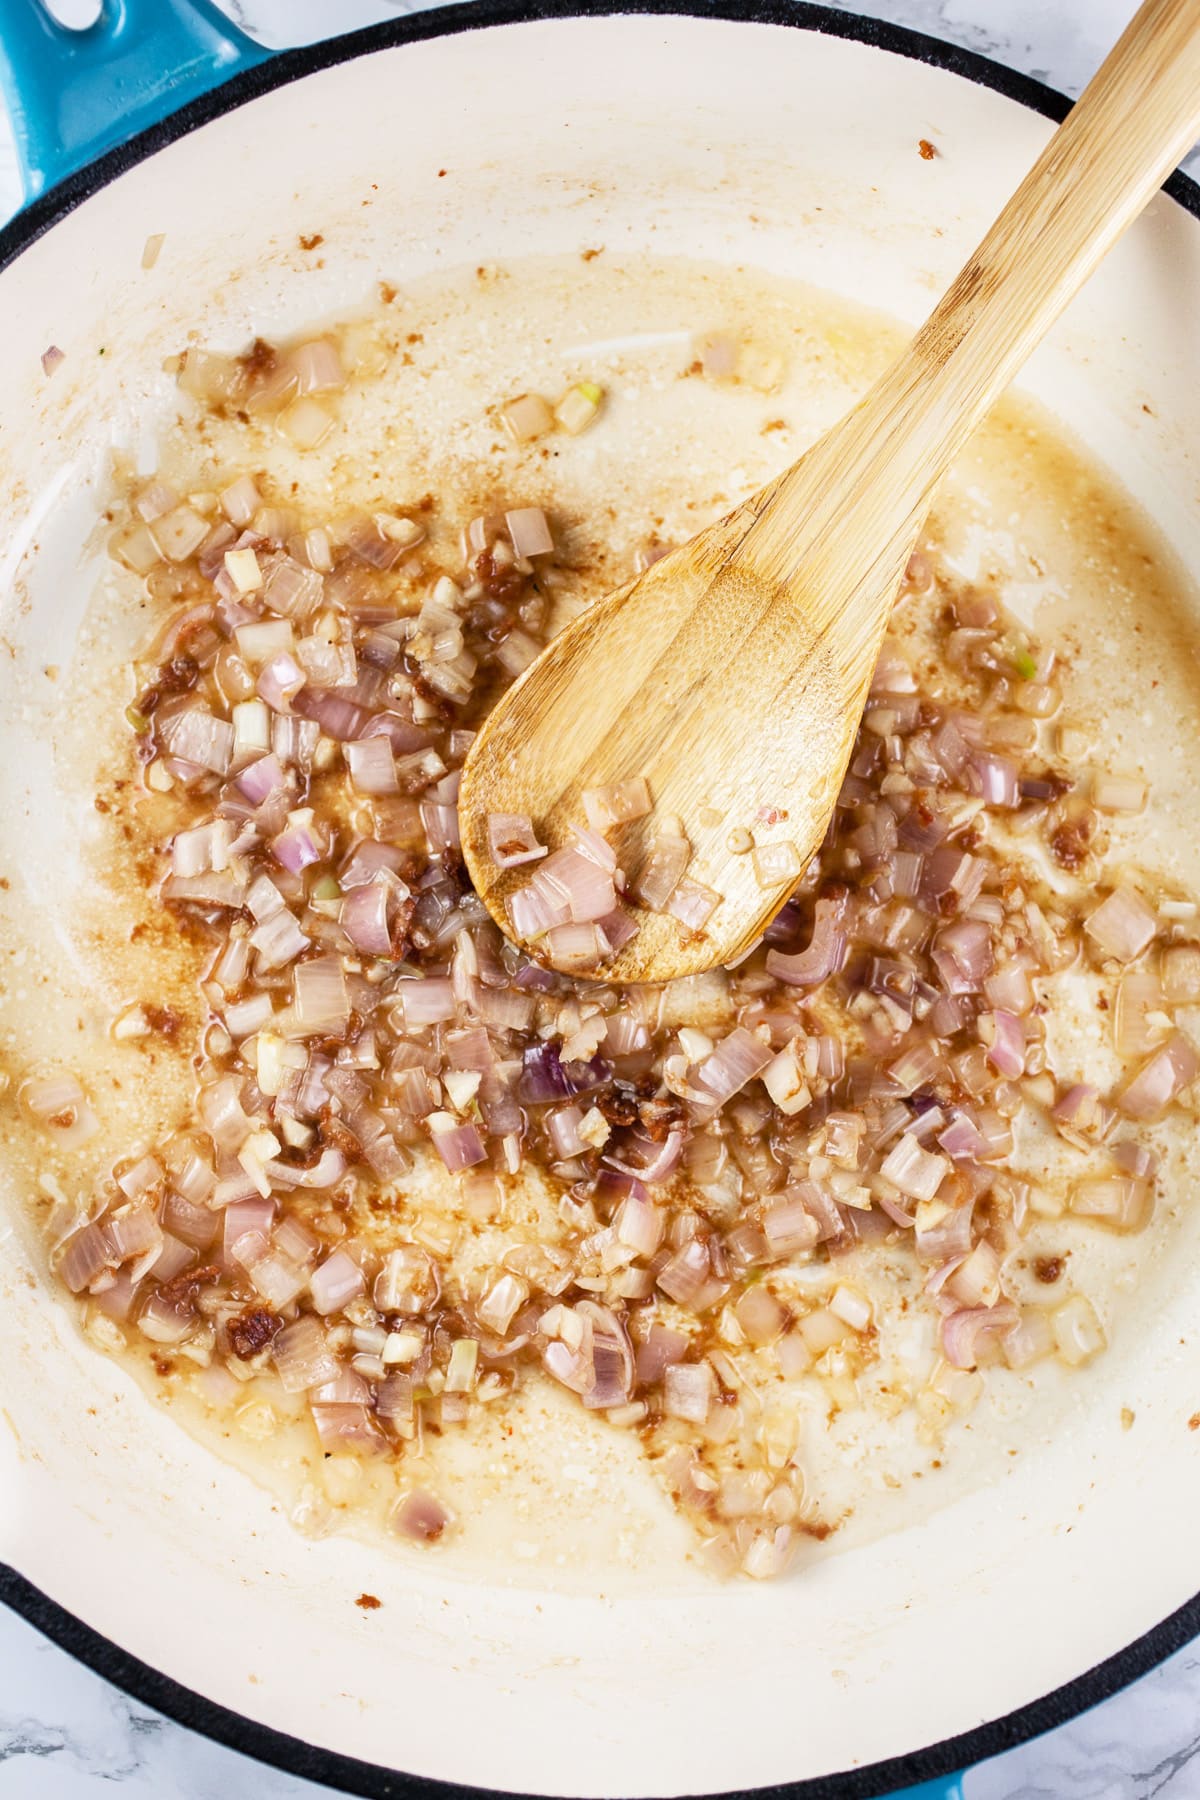 Minced garlic and shallots sautéed in skillet with wooden spoon.